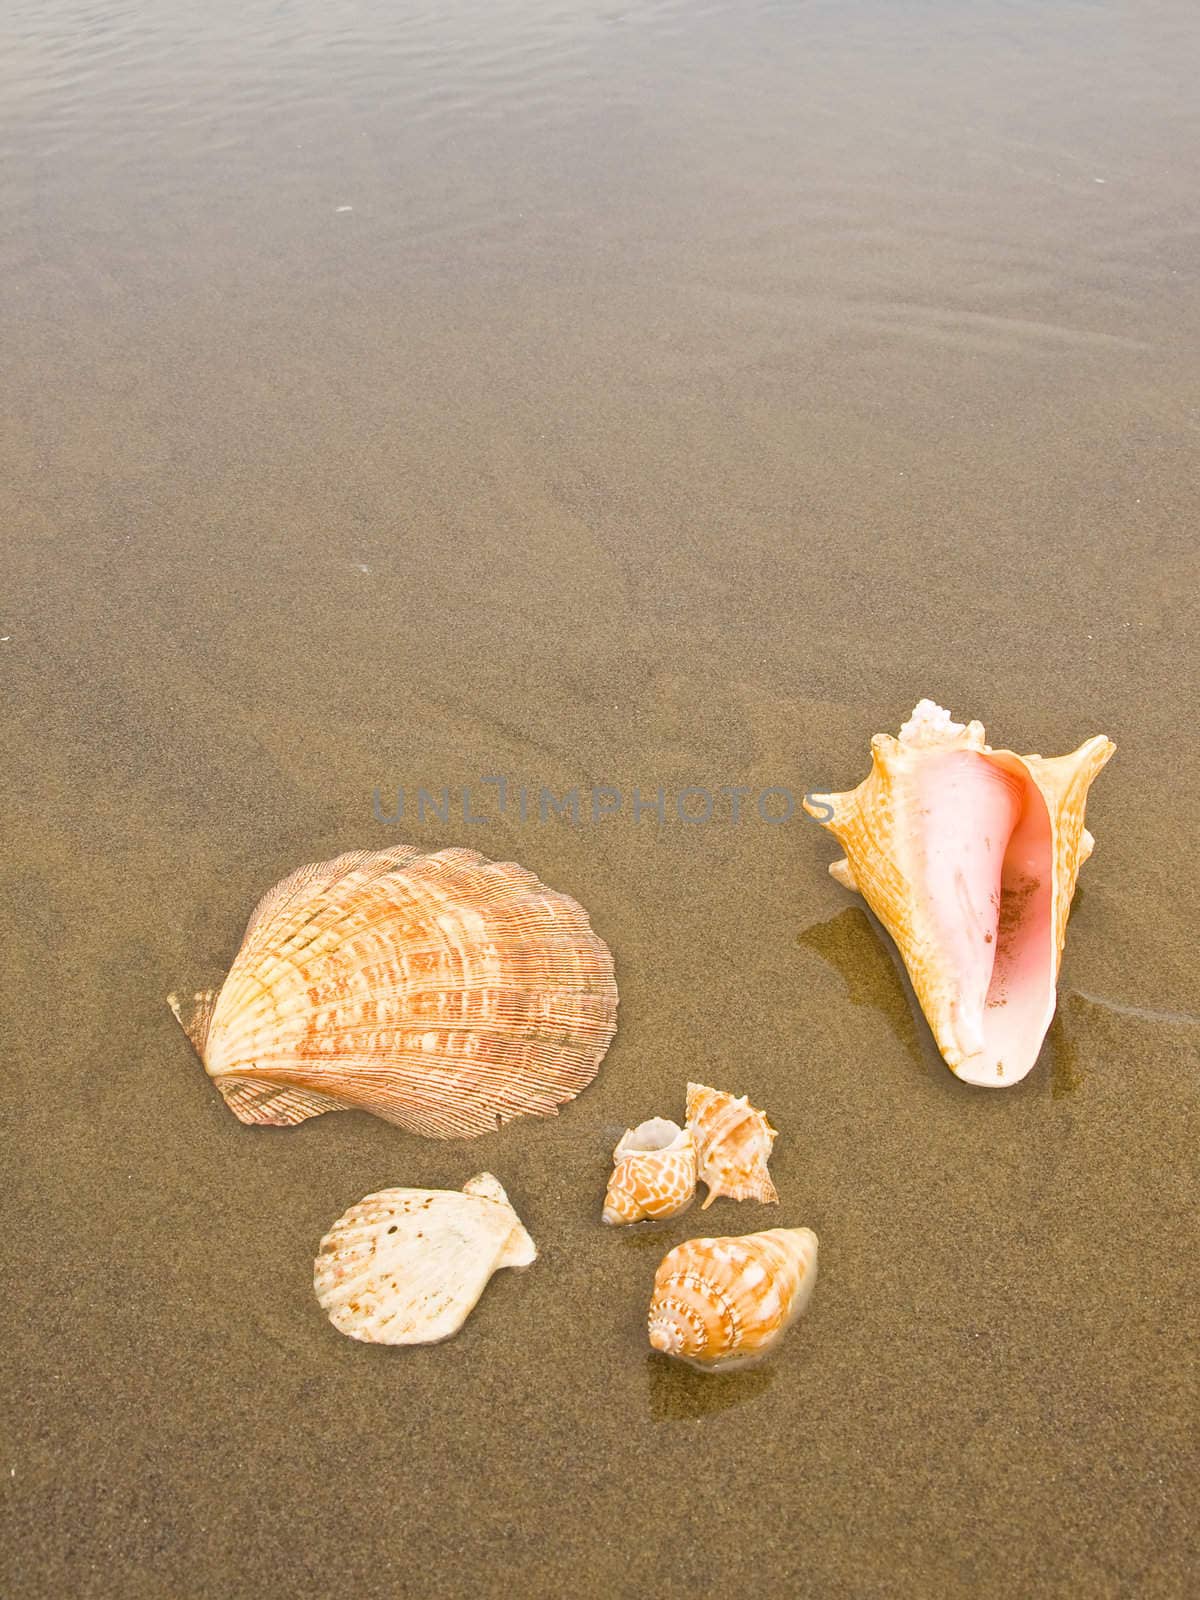 Scallop and Conch Shells on a Wet Sandy Beach